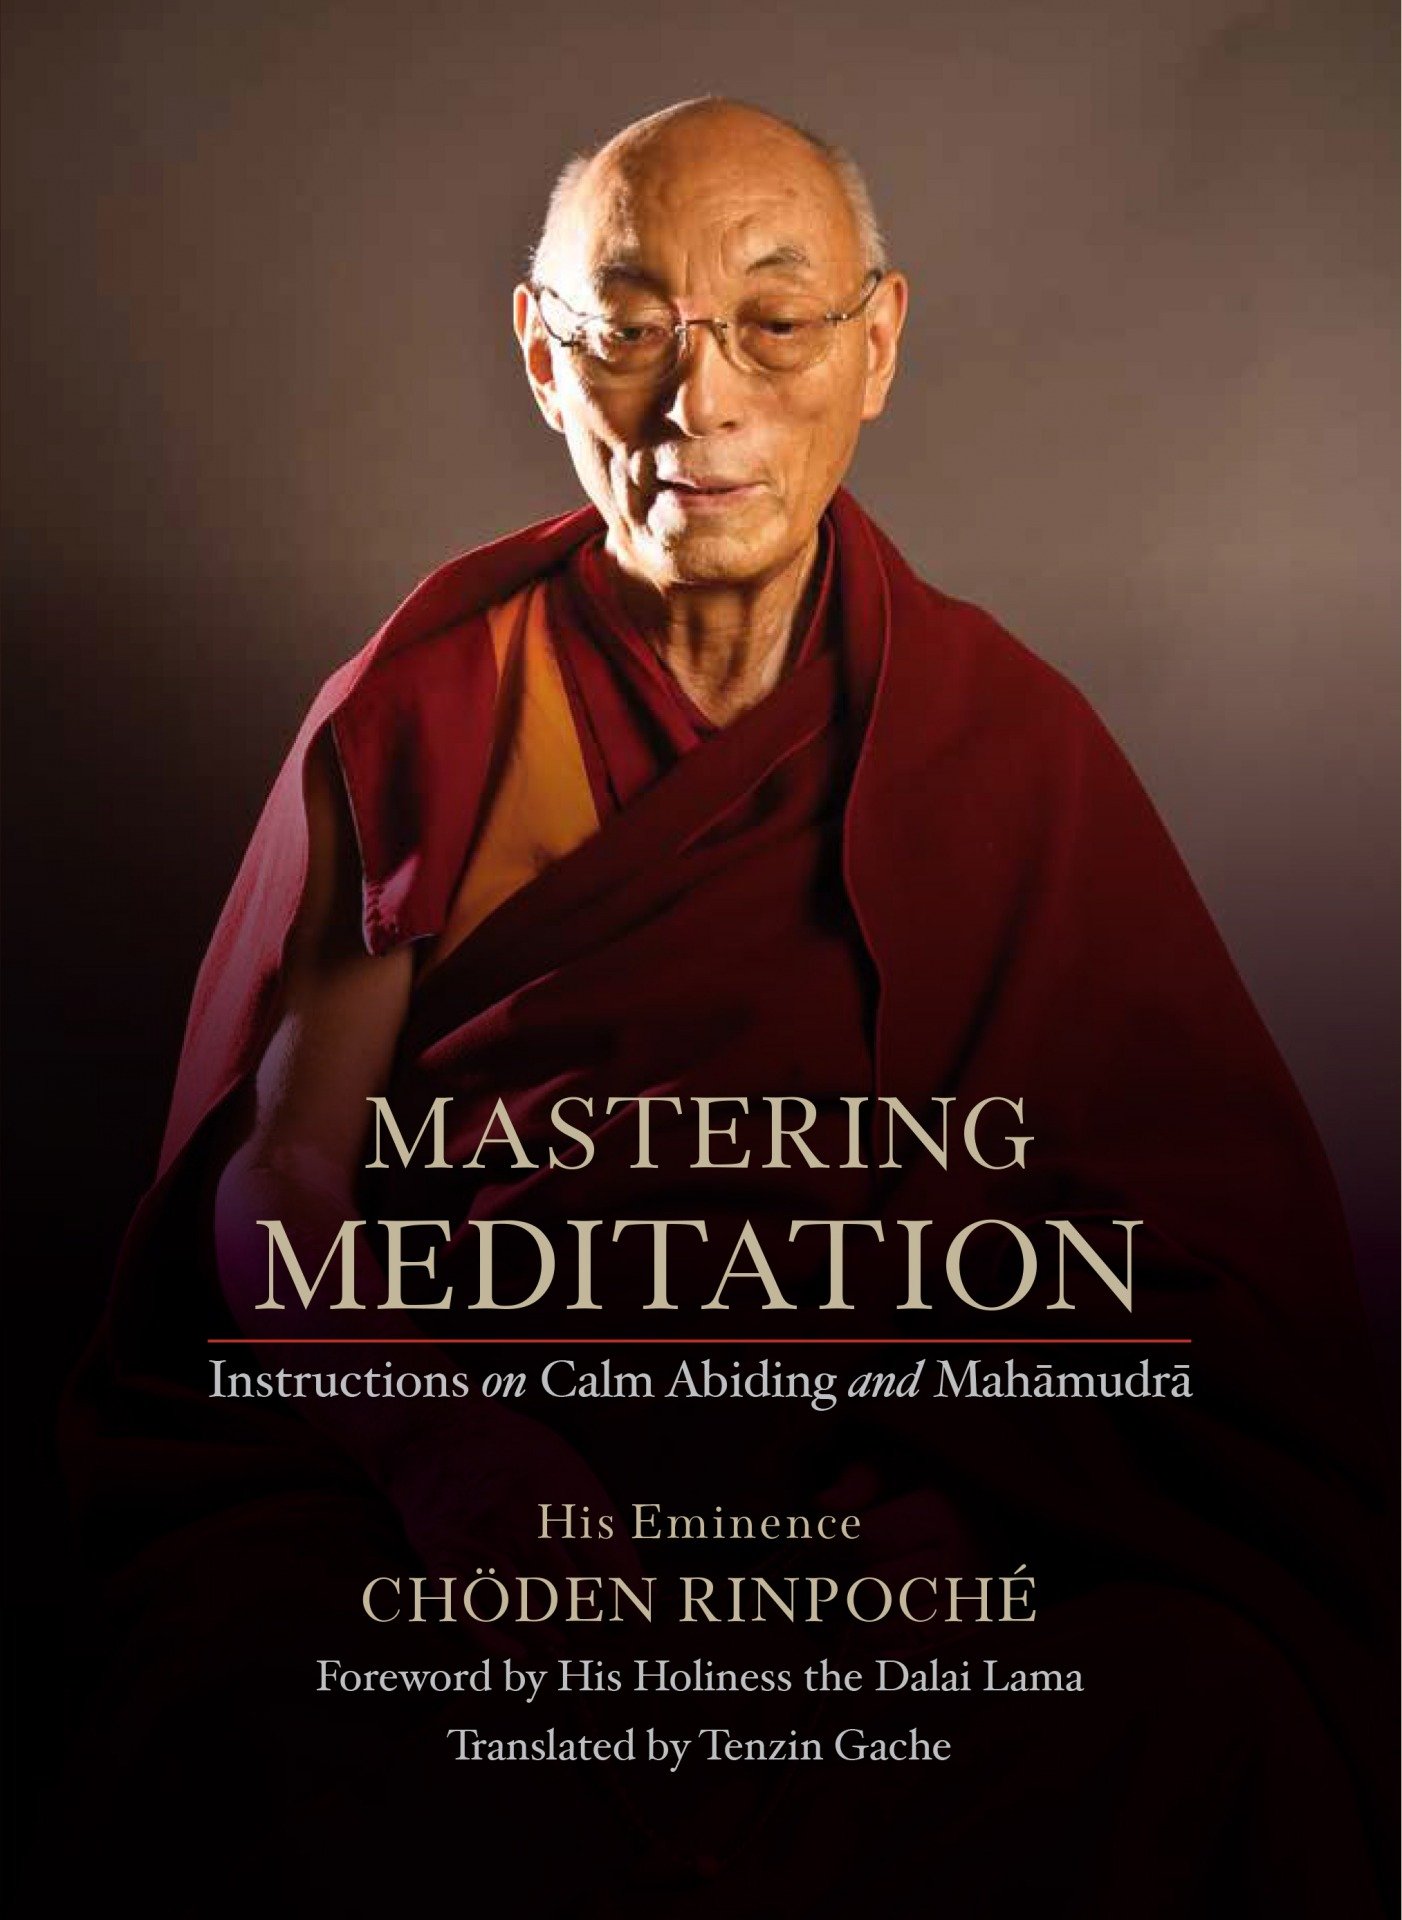 The Art of Transforming the Mind: A Meditator's Guide to the Tibetan Practice of Lojong [Book]